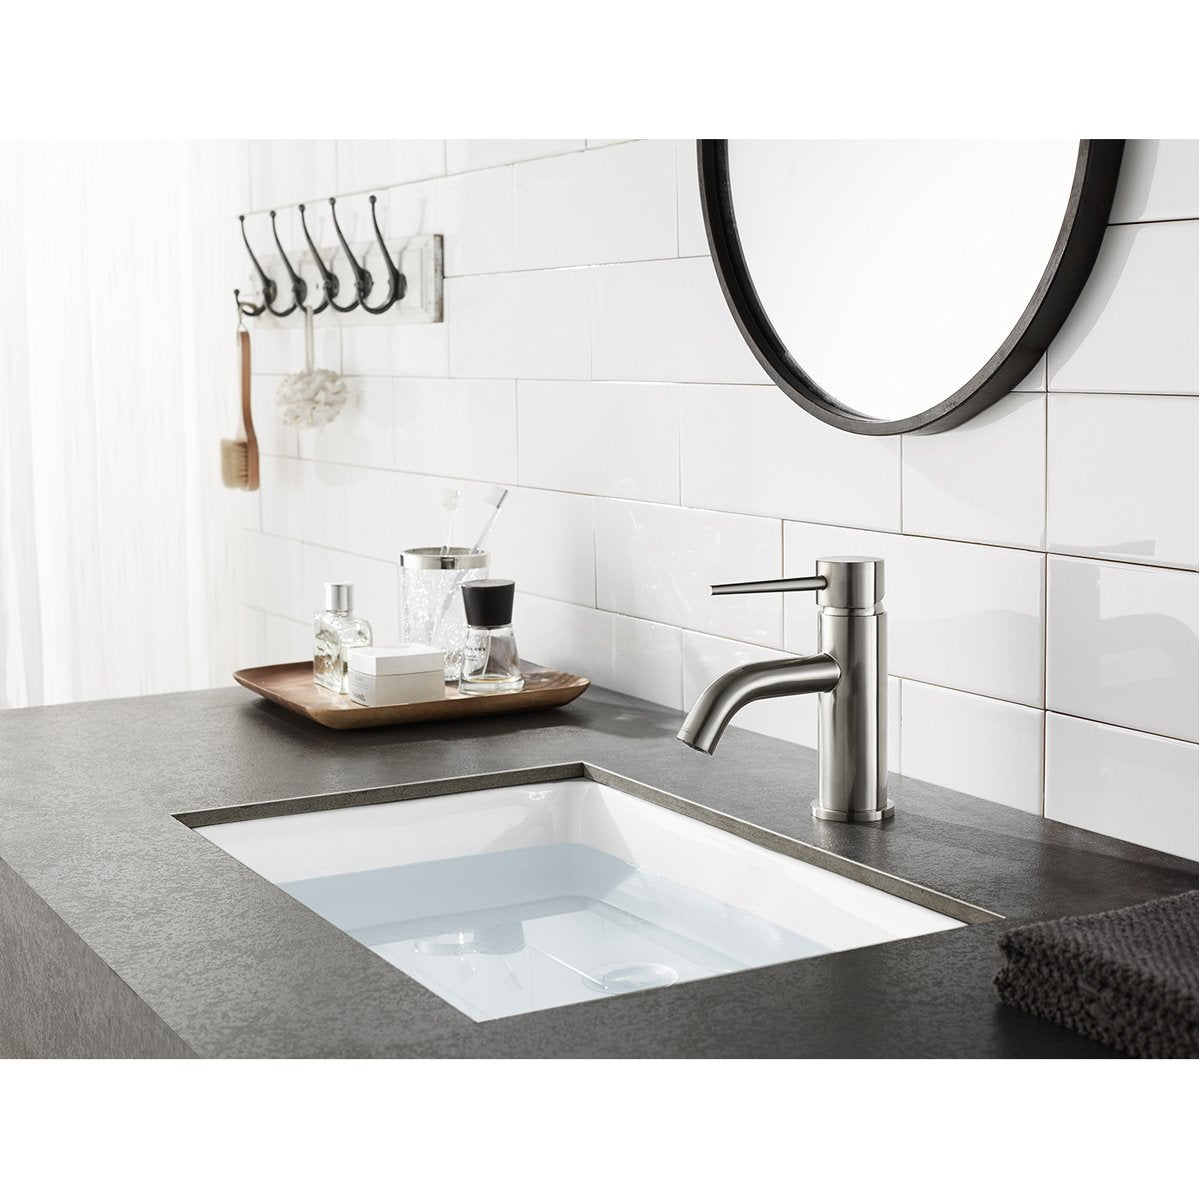 Kingston Brass New York Fauceture 4-Inch Center Single Handle Bathroom Faucet